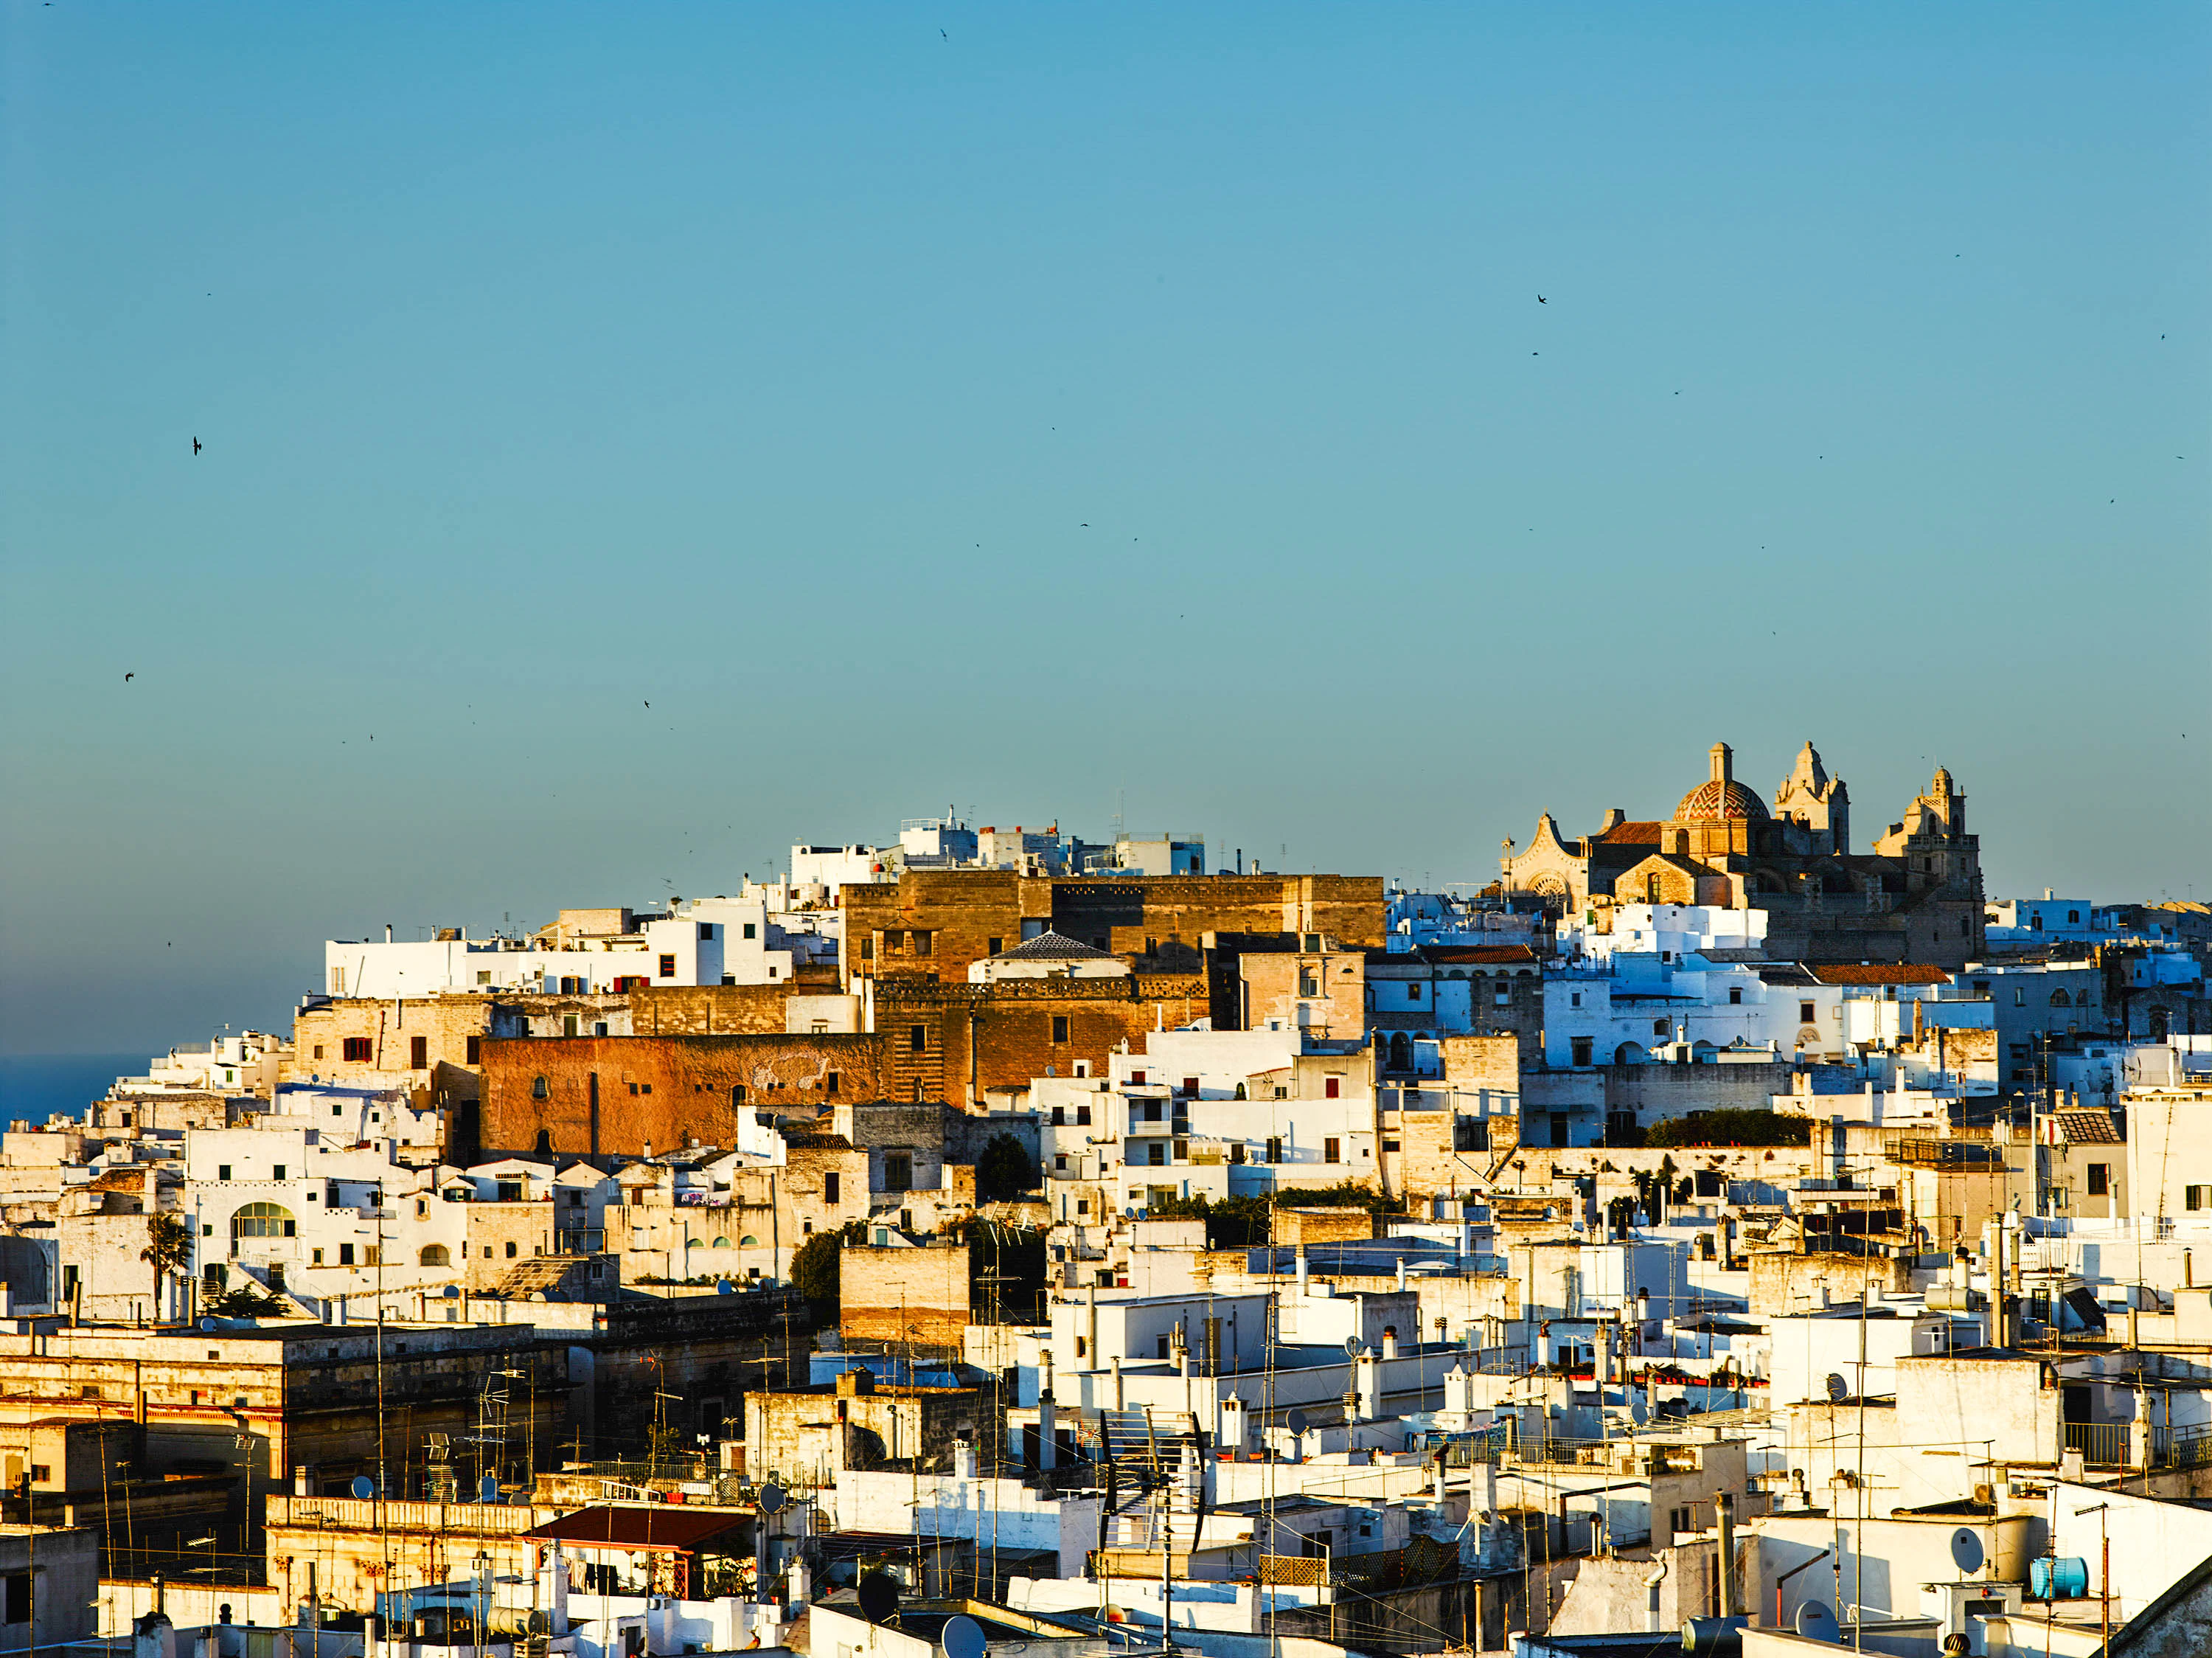 A town sits perched on the top of a hill against a blue sky.